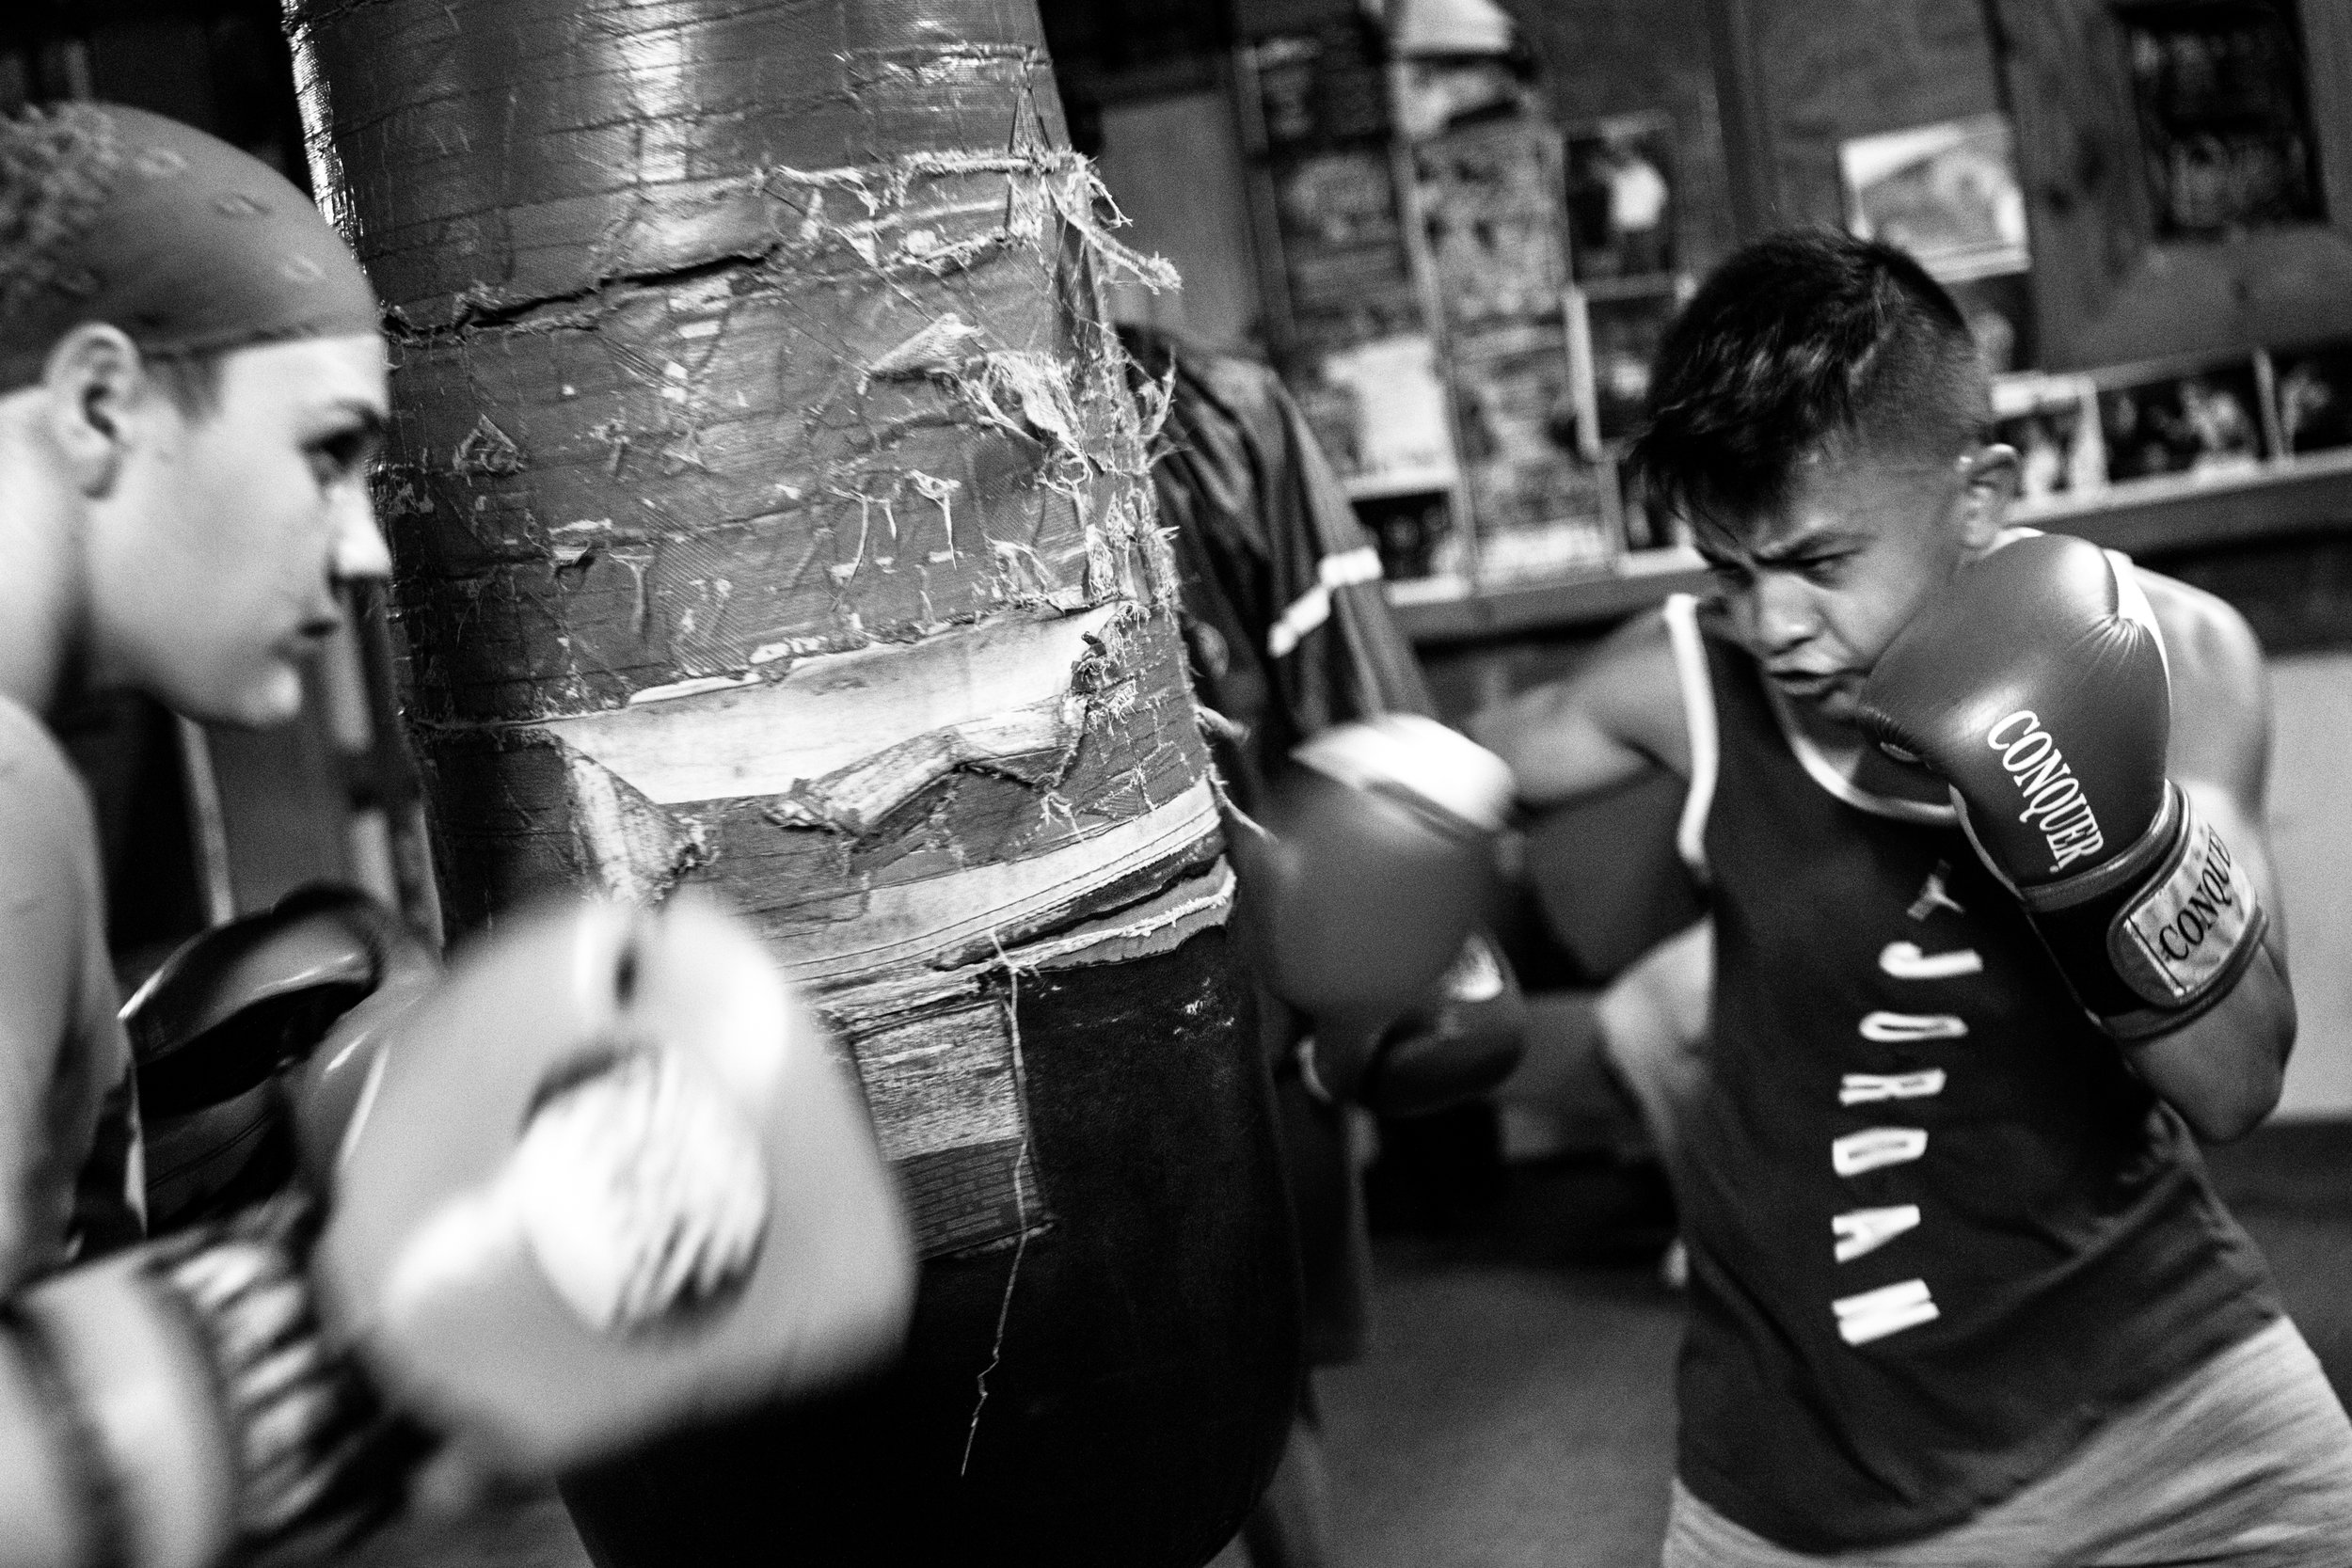  Reina Tellez, 14, and AJ Ramos, 13, take turns punching during a bag drill at the Ramos Boxing gym in the South Side neighborhood of San Antonio, Texas.&nbsp; 